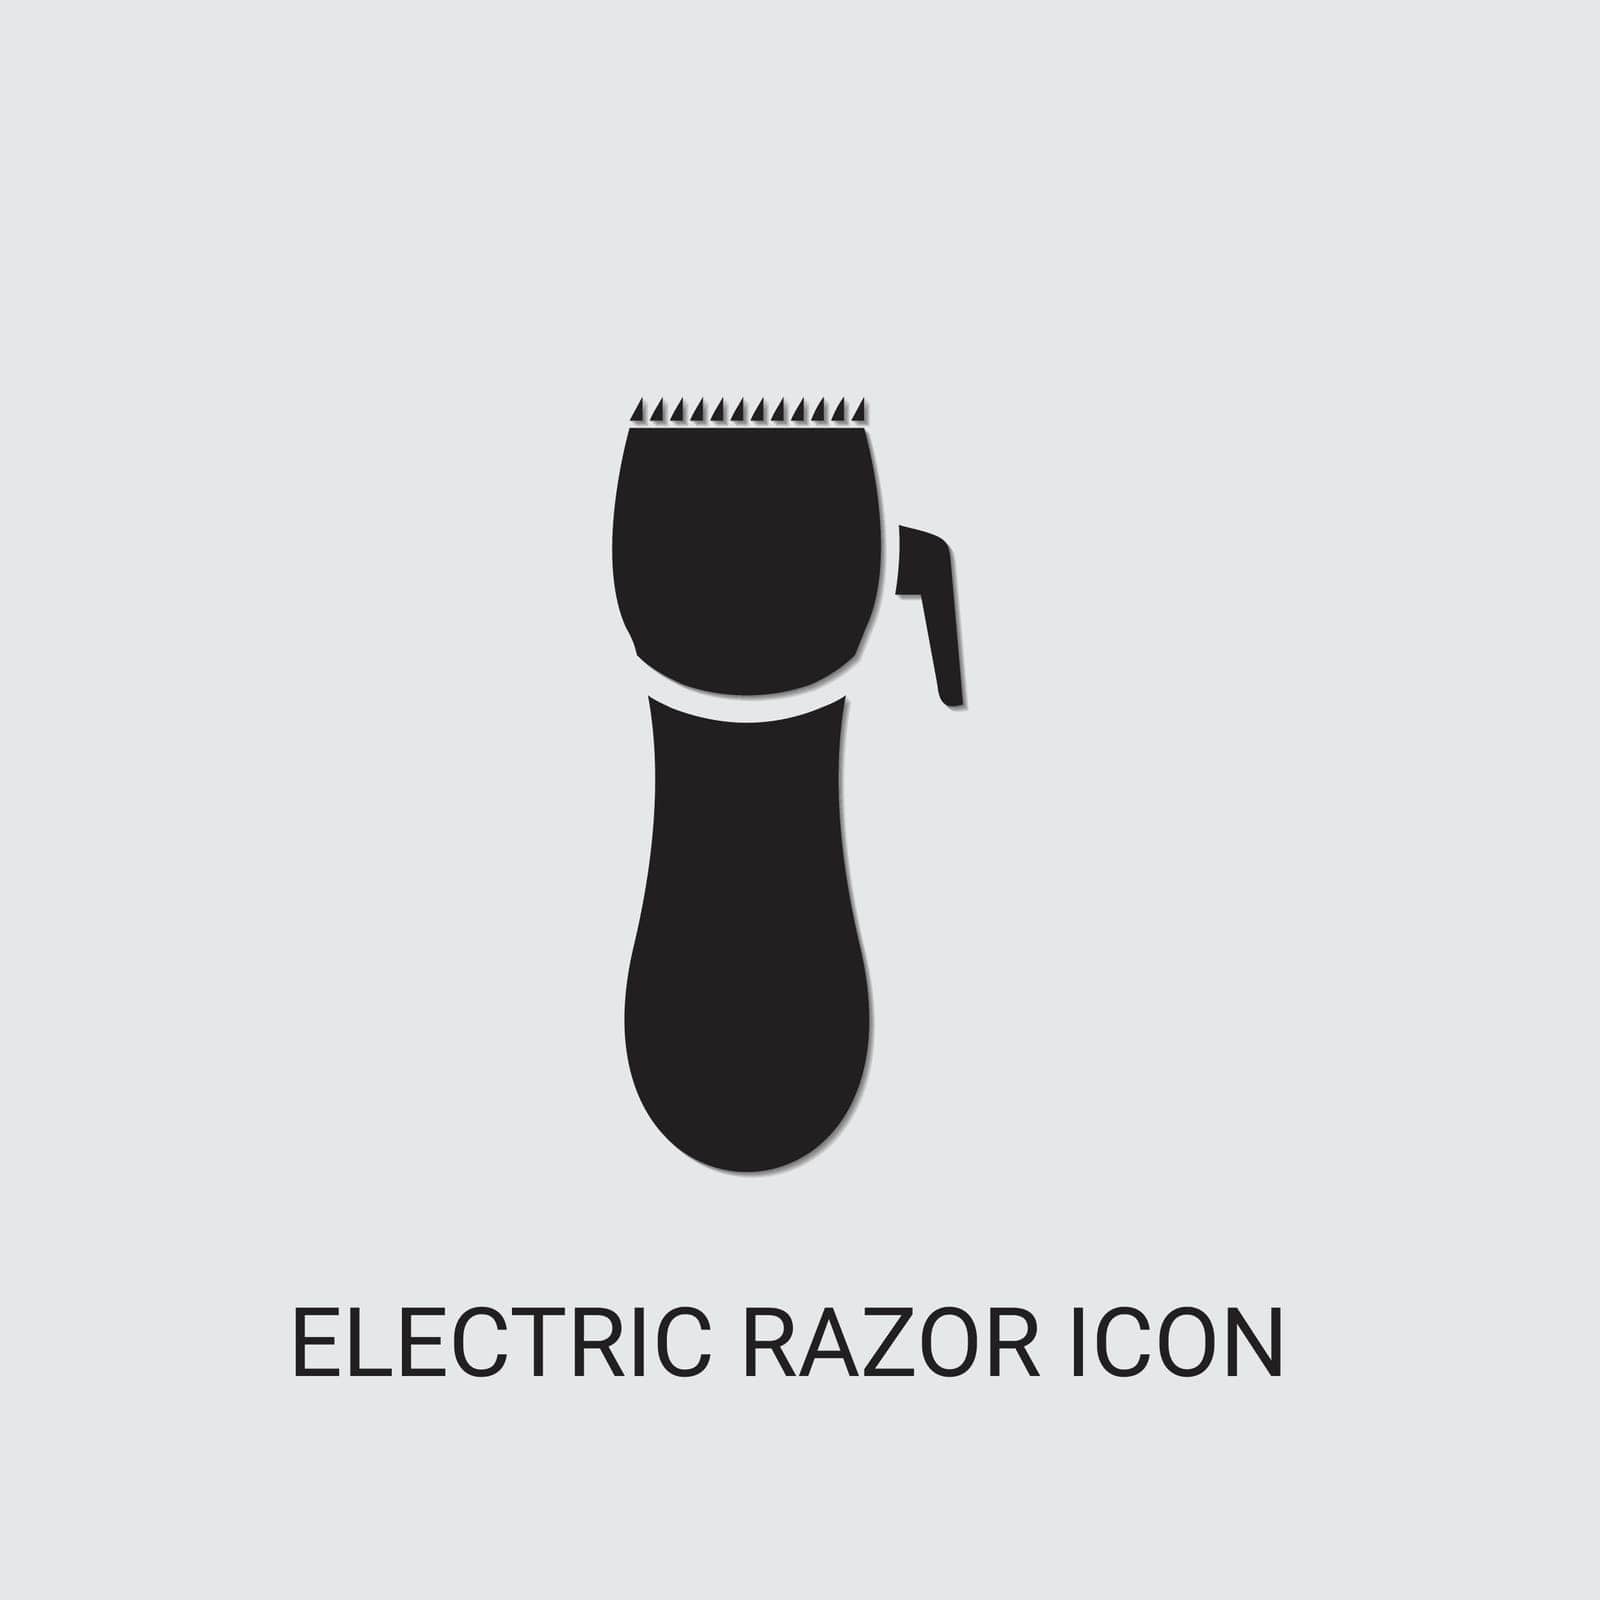 symbol,blades,cut,beauty,icon,sign,isolated,cutter,hair,shaver,modern,hygiene,design,vector,barber,clipper,shave,element,groom,set,electric,equipment,filled,technology,sharp,face,removal,razor,illustration,care by ogqcorp